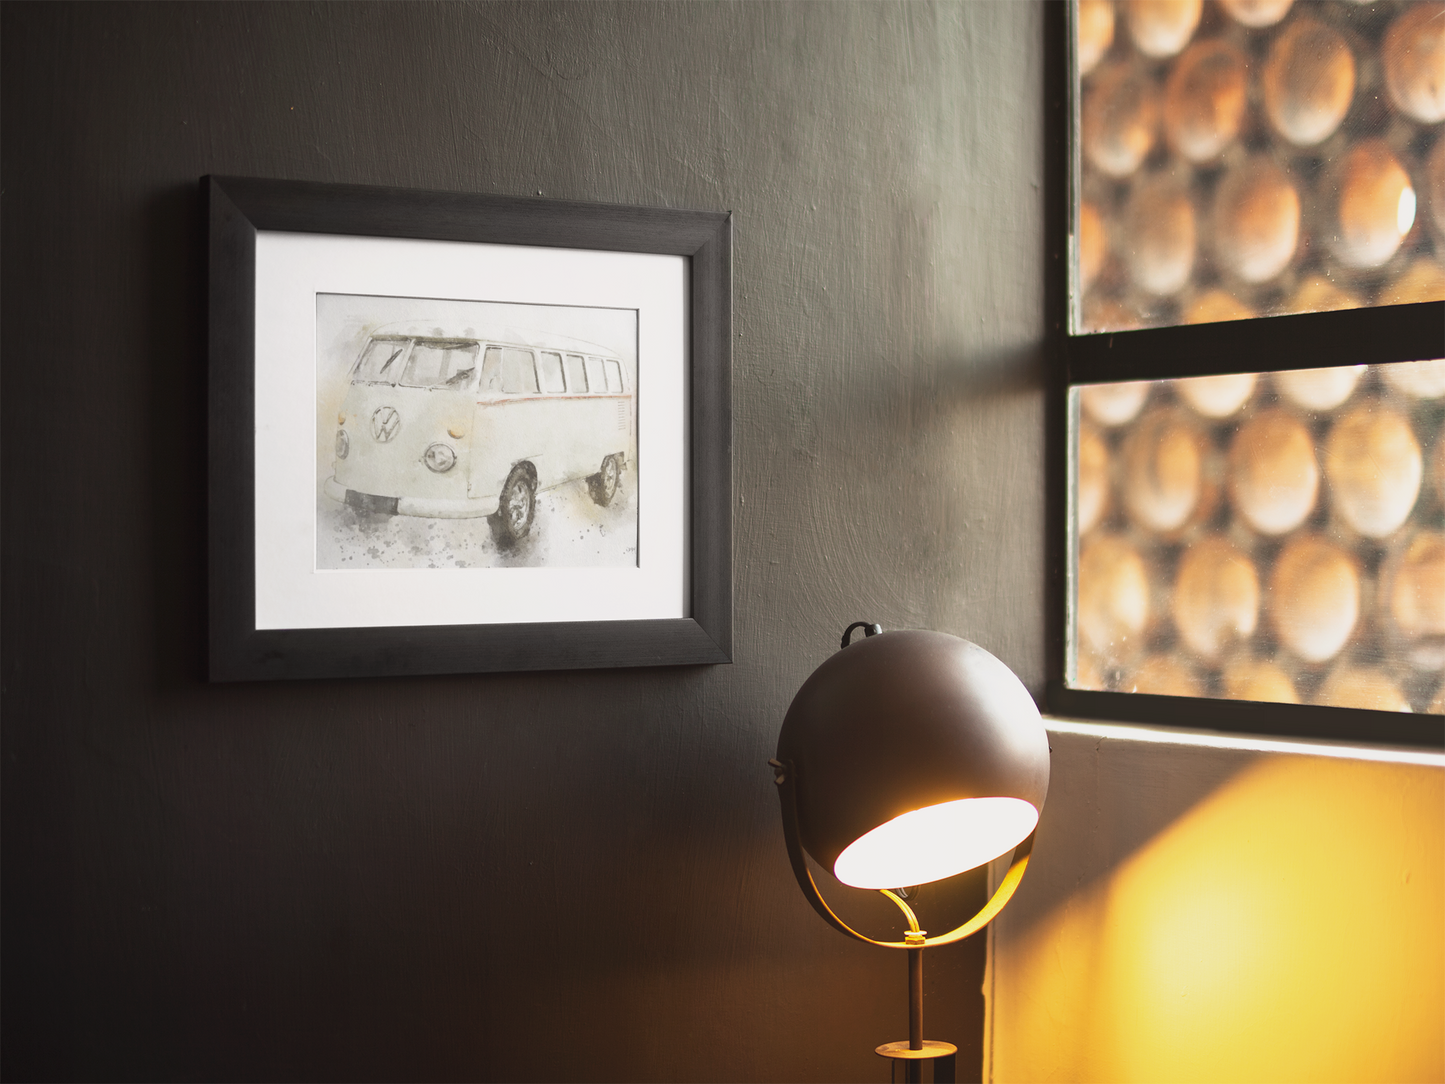 Campervan Wall Art Print - available in different sizes